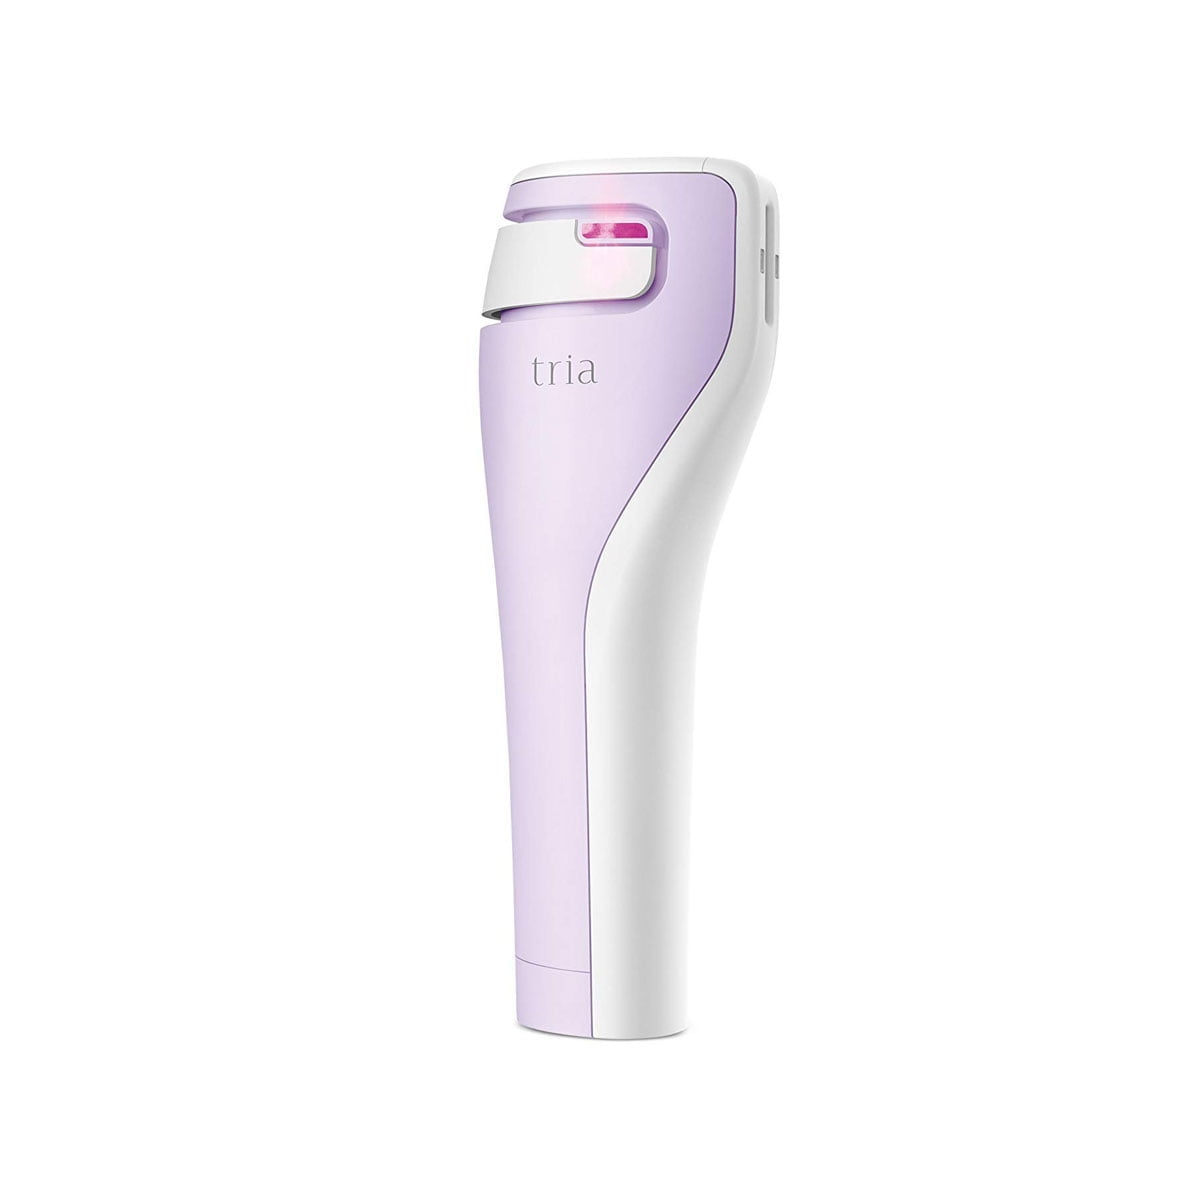 Tria Beauty Age Defying Laser Wrinkles Fine Lines 2 &Lt;Div Class=&Quot;Page-Title-Wrapper Product&Quot;&Gt; &Lt;H1&Gt;Tria - Age Defying Laser&Lt;/H1&Gt; Https://Www.youtube.com/Watch?V=Qcuojbj97Zq &Lt;/Div&Gt; &Lt;Div Class=&Quot;Product-Info-Price&Quot;&Gt; Tria'S Fractional, Non-Ablative Skin Rejuvenating Laser Will Treat Multiple Signs Of Aging, Making You Appear More Youthful And Radiant. It Reduces Fine Lines And Wrinkles Around Eyes And Mouth And Improves Skin’s Texture And Reduces Appearance Of Dark Pigmentation Such As Brown Spots. Please Allow Additional 2-3 Days Over The Estimated Delivery Time Given At Check Out &Lt;/Div&Gt; &Lt;Pre&Gt;&Lt;B&Gt;We Also Provide International Wholesale And Retail Shipping To All Gcc Countries: Saudi Arabia, Qatar, Oman, Kuwait, Bahrain.&Lt;/B&Gt;&Lt;/Pre&Gt; Age Defying Laser Tria - Age Defying Laser